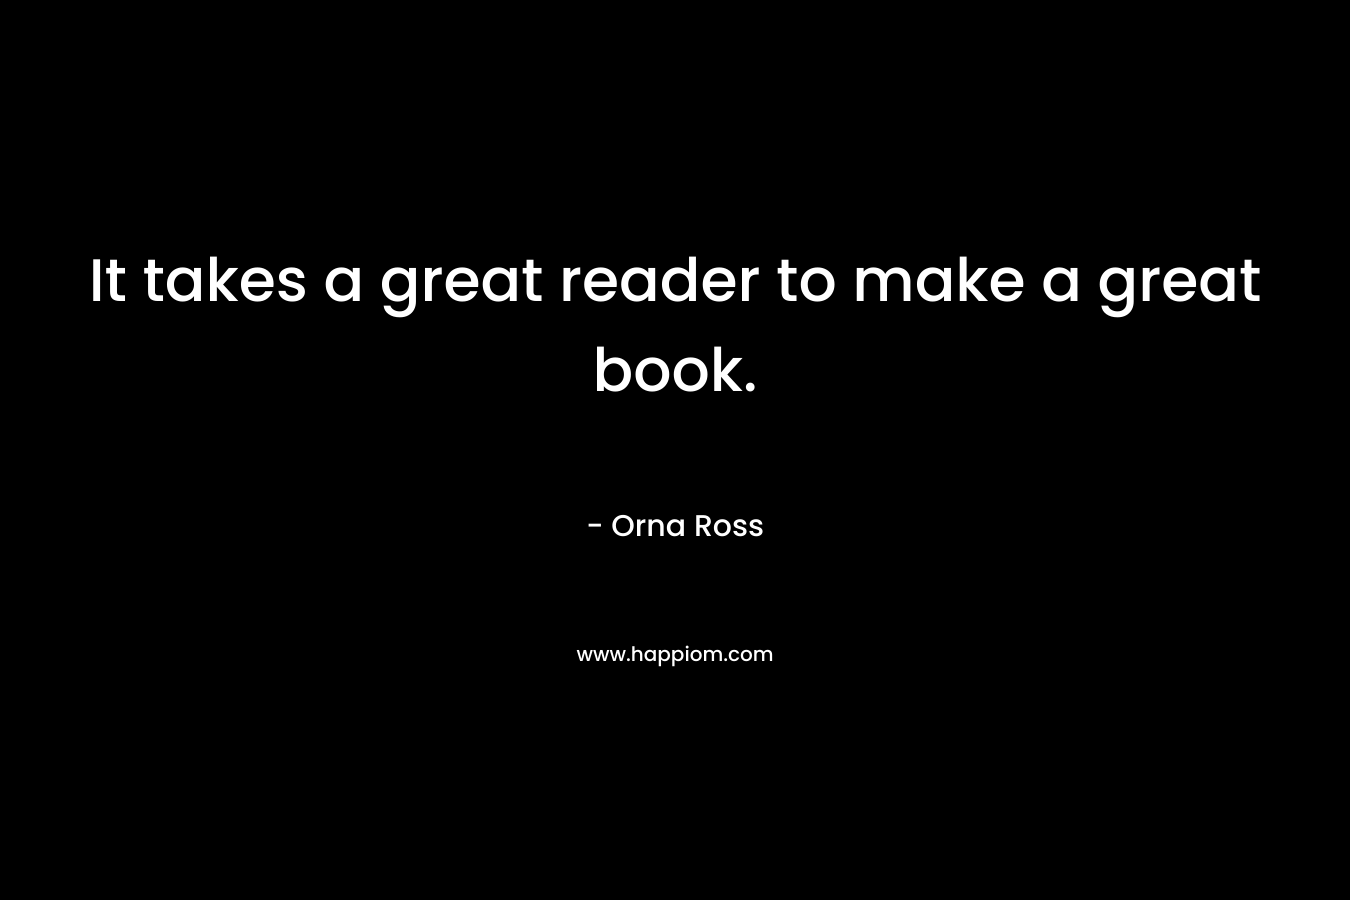 It takes a great reader to make a great book. – Orna Ross